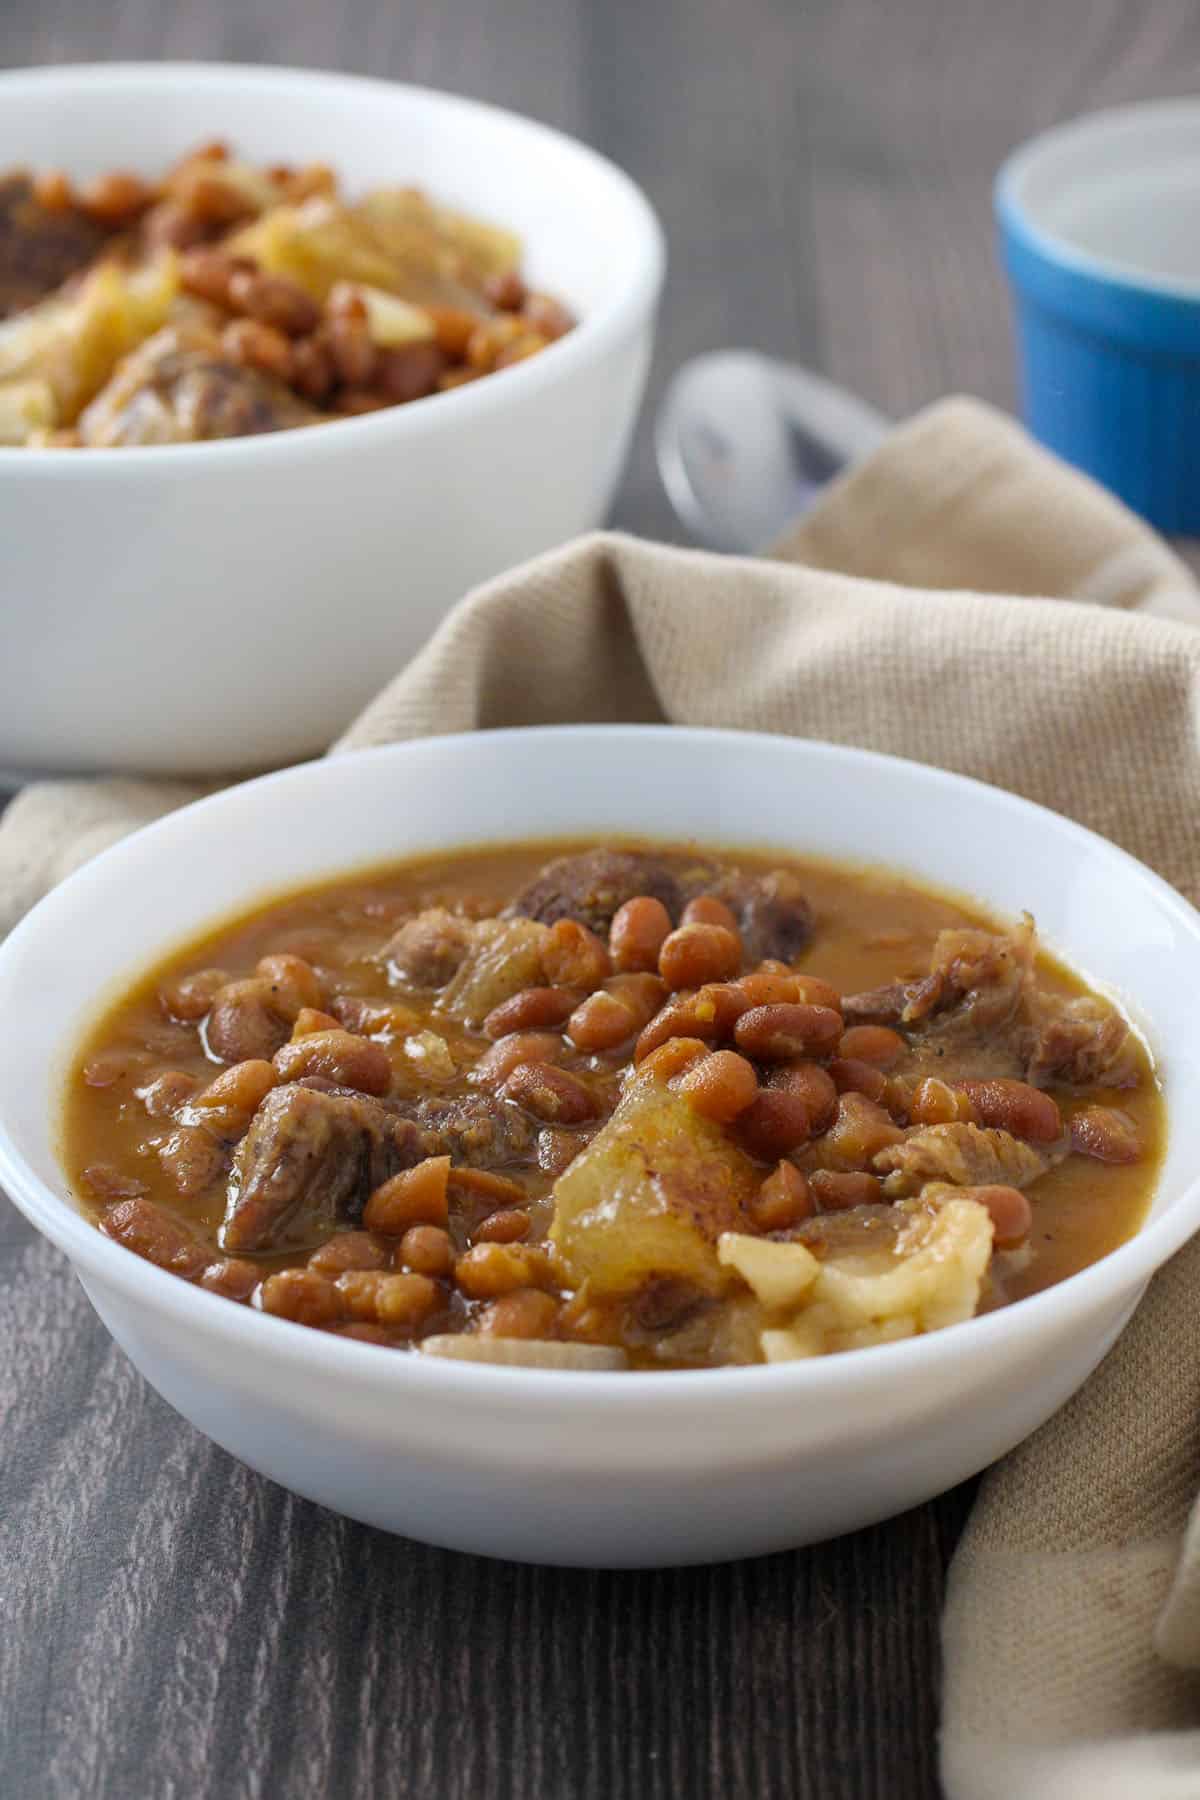 Papis beef tendon and beans stew in a white serving bowl